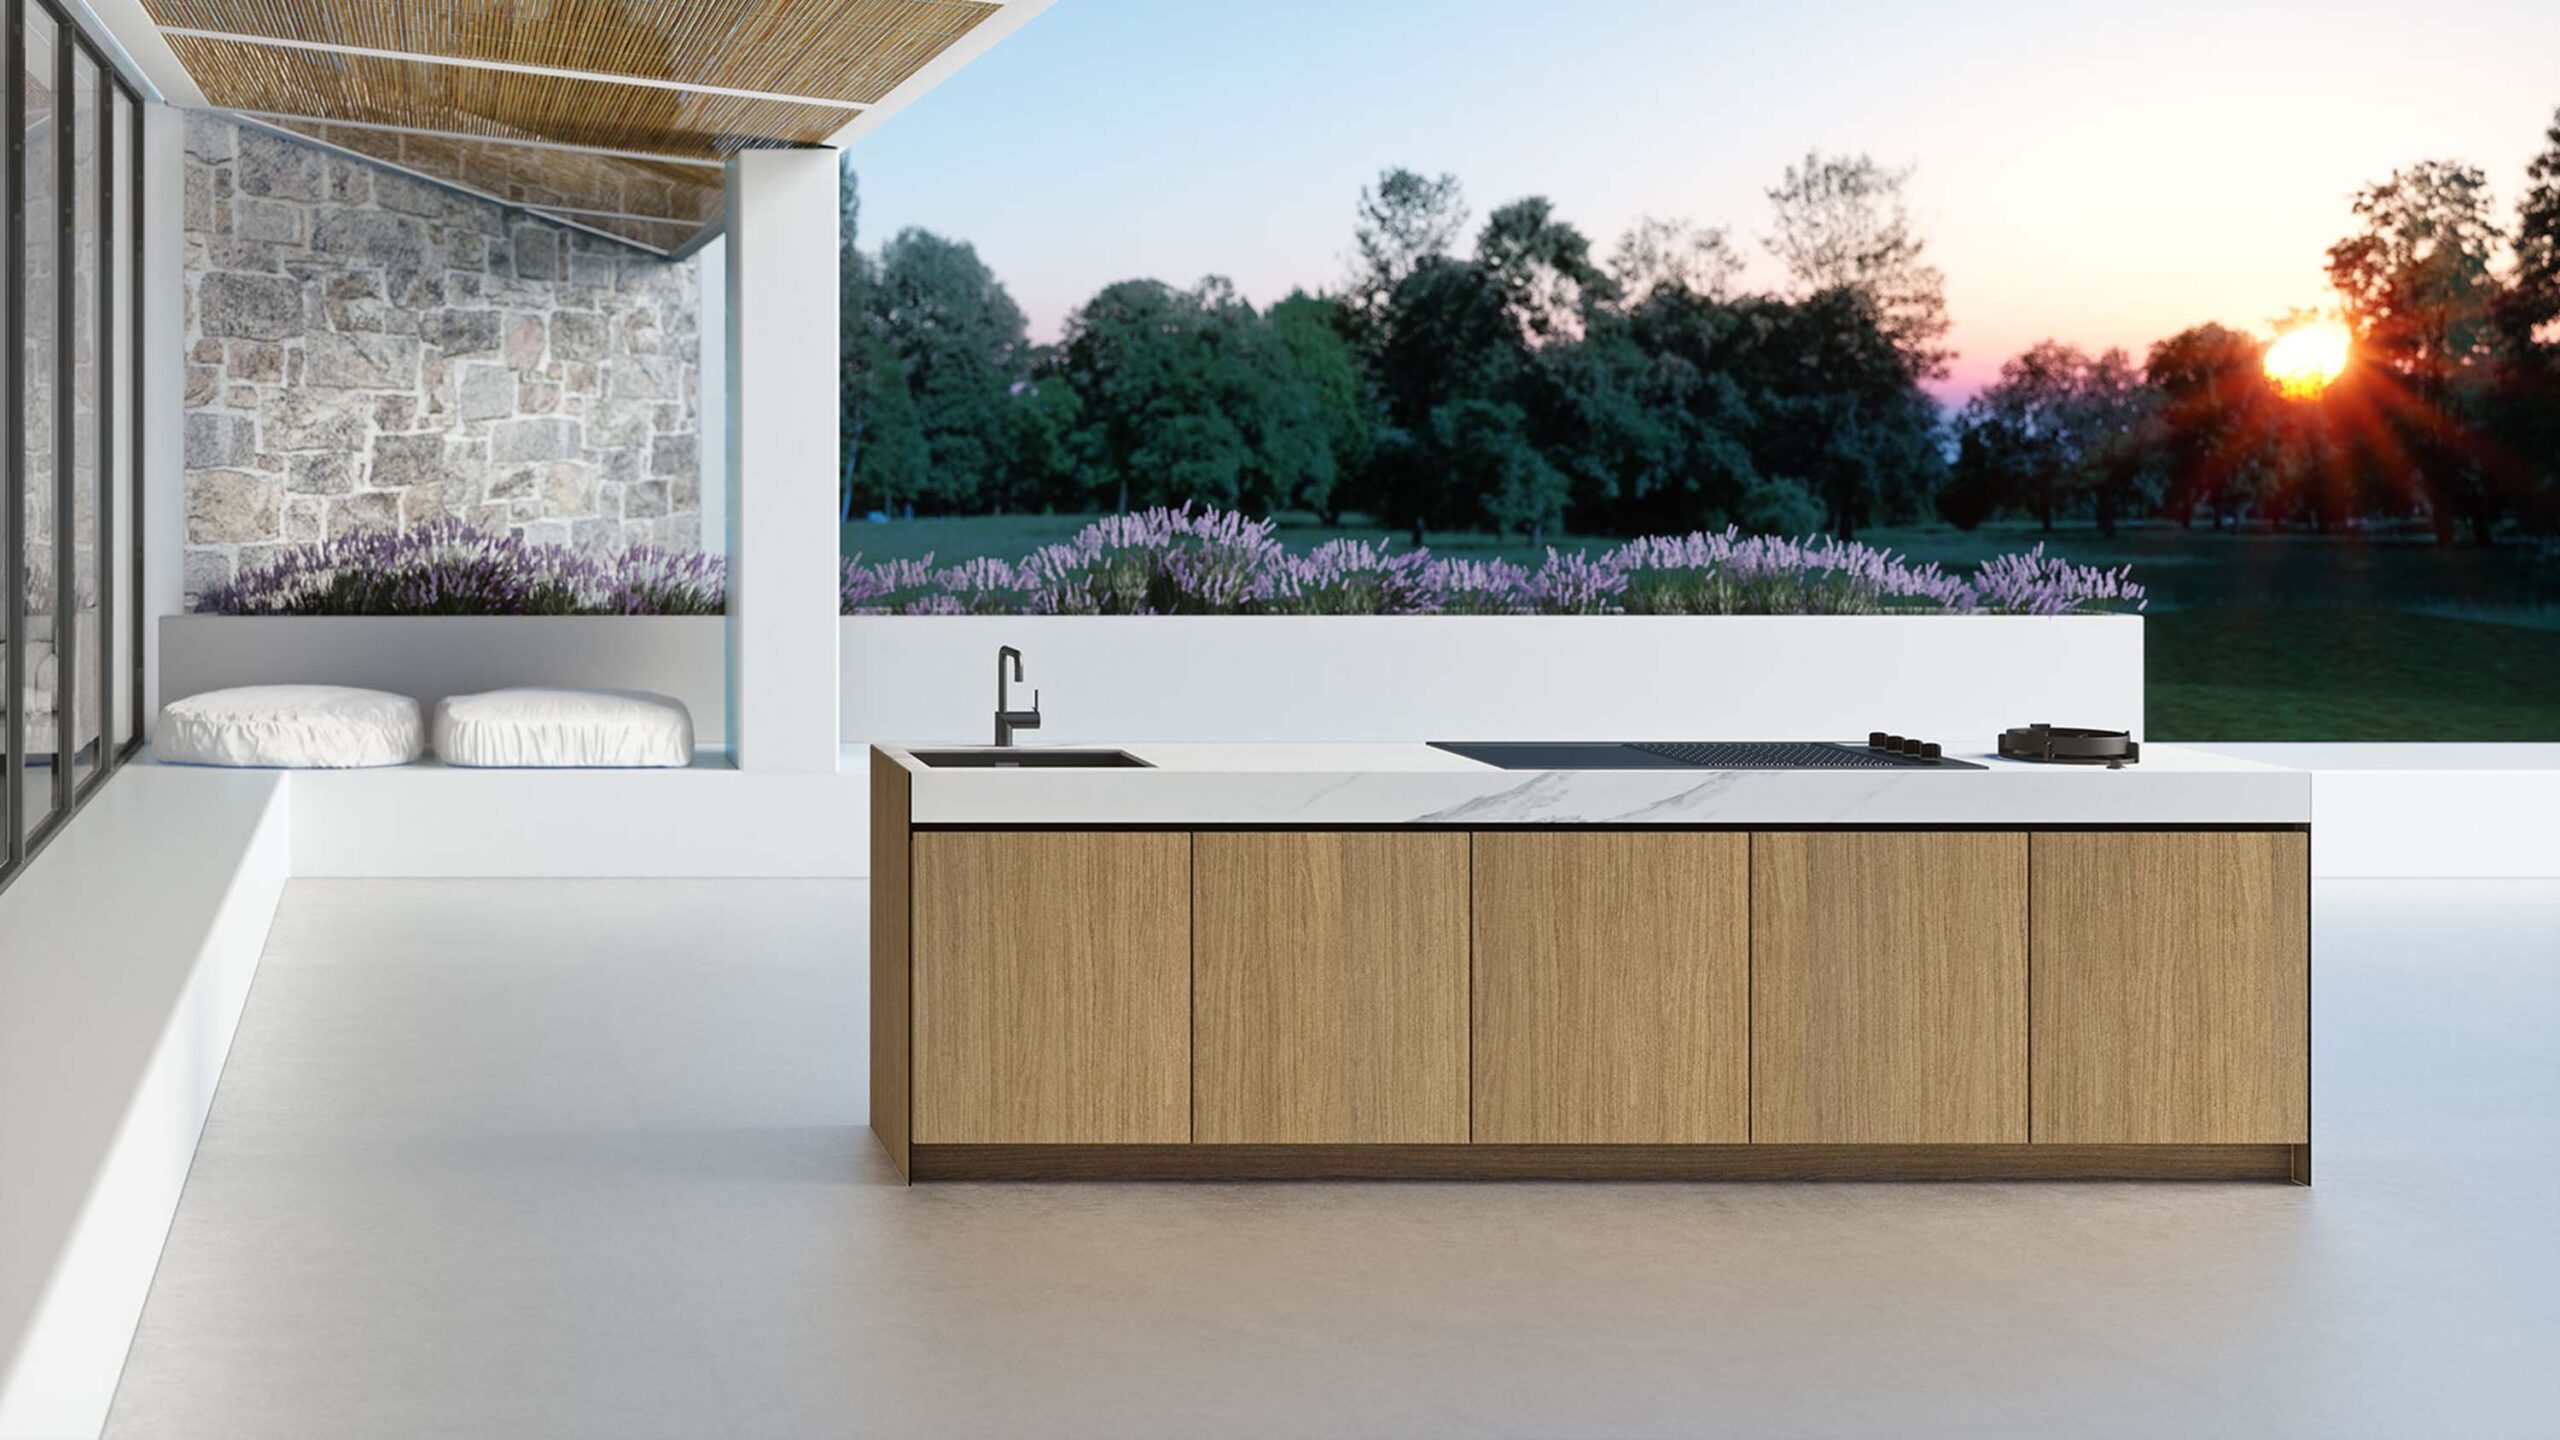 Modern modular outdoor kitchen by Krieder UK. Finished in high pressure laminate (HPL). Designed and installed in your outdoor space.